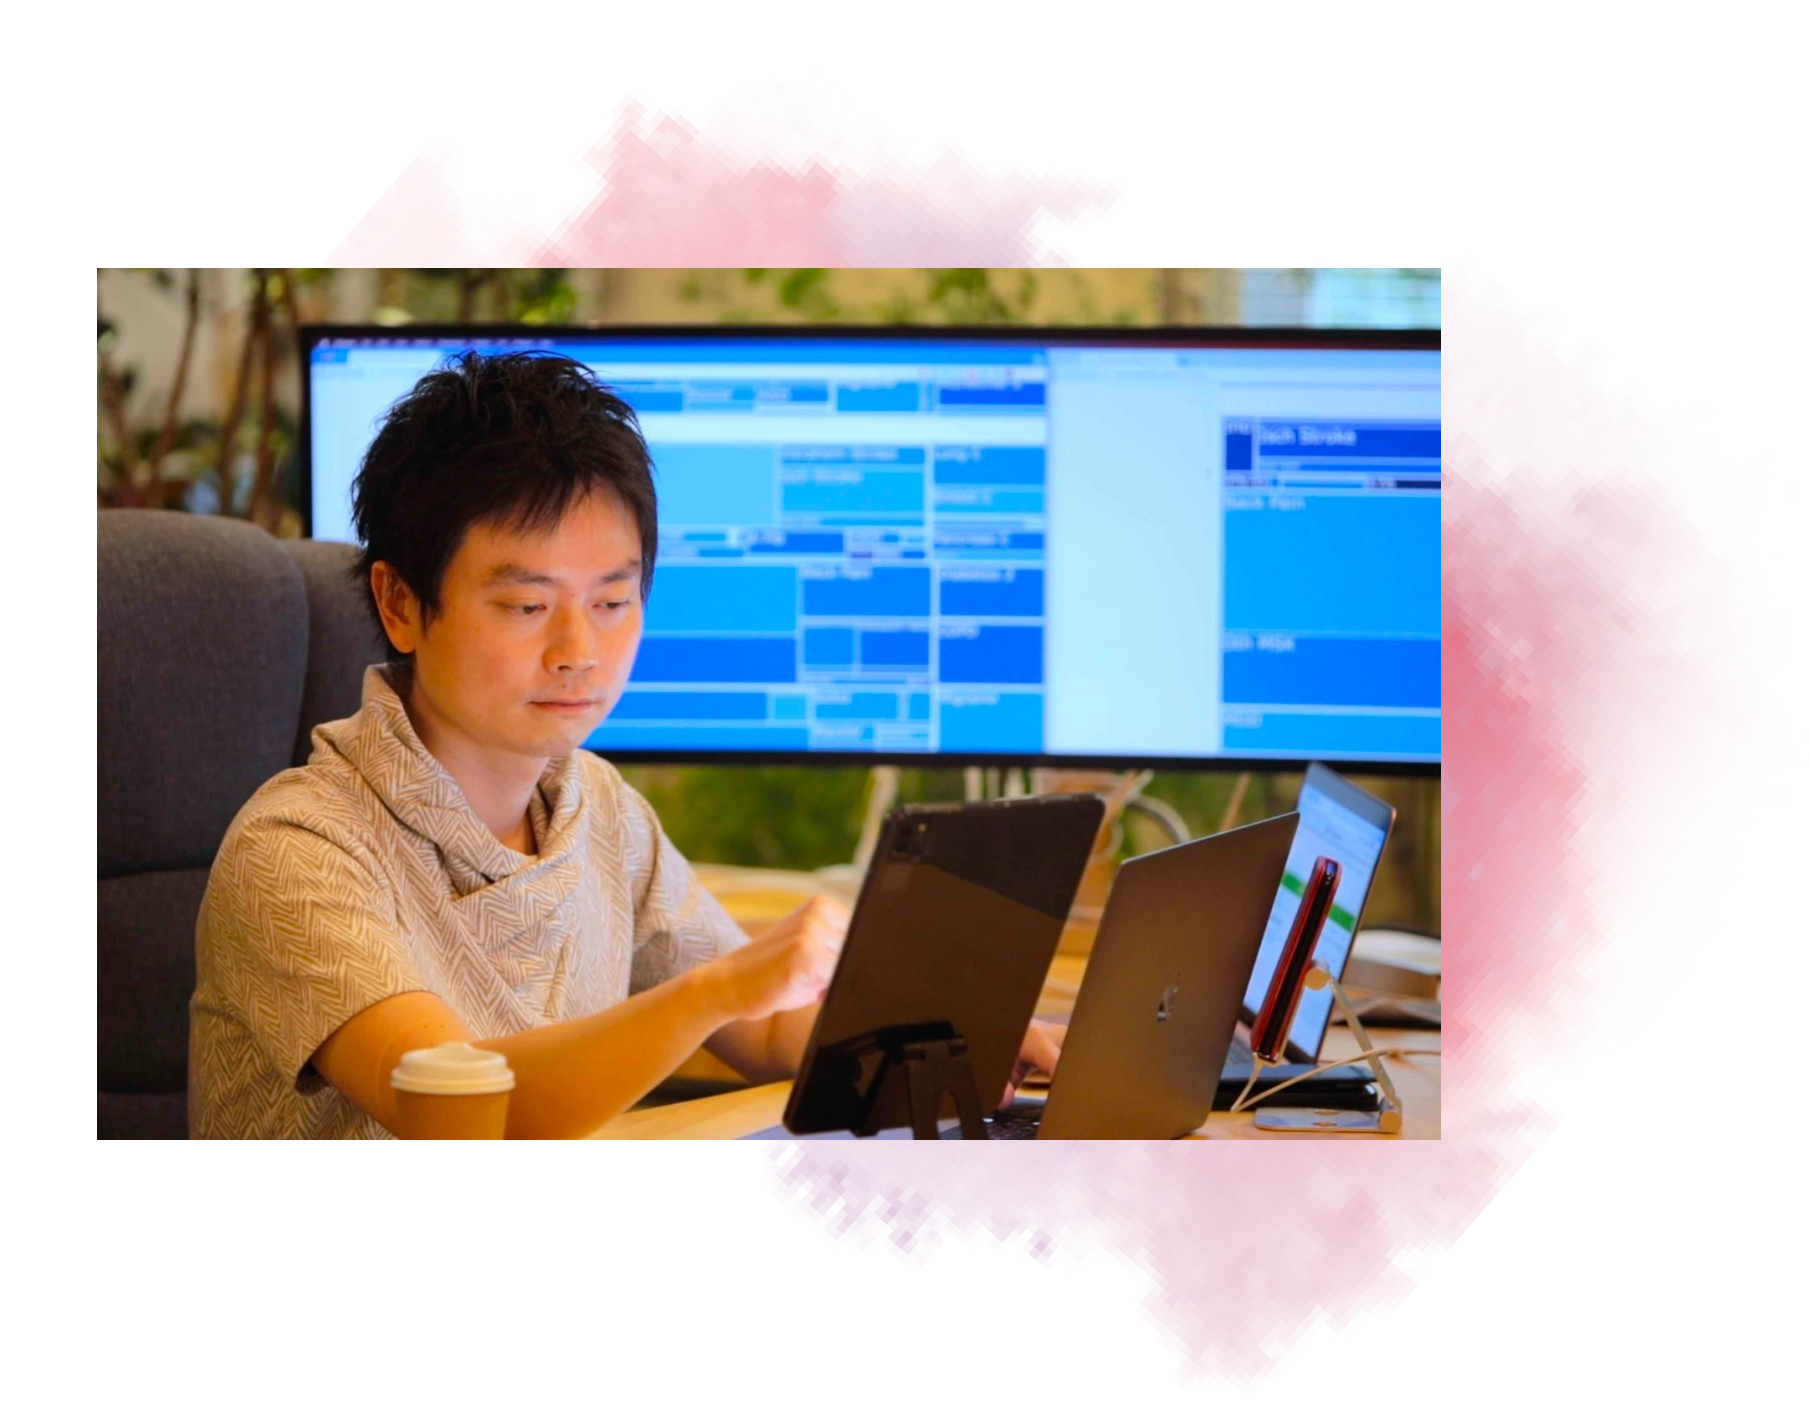 Dr. Nomura sits in an office with computer screen displaying GBD Compare visualization tool